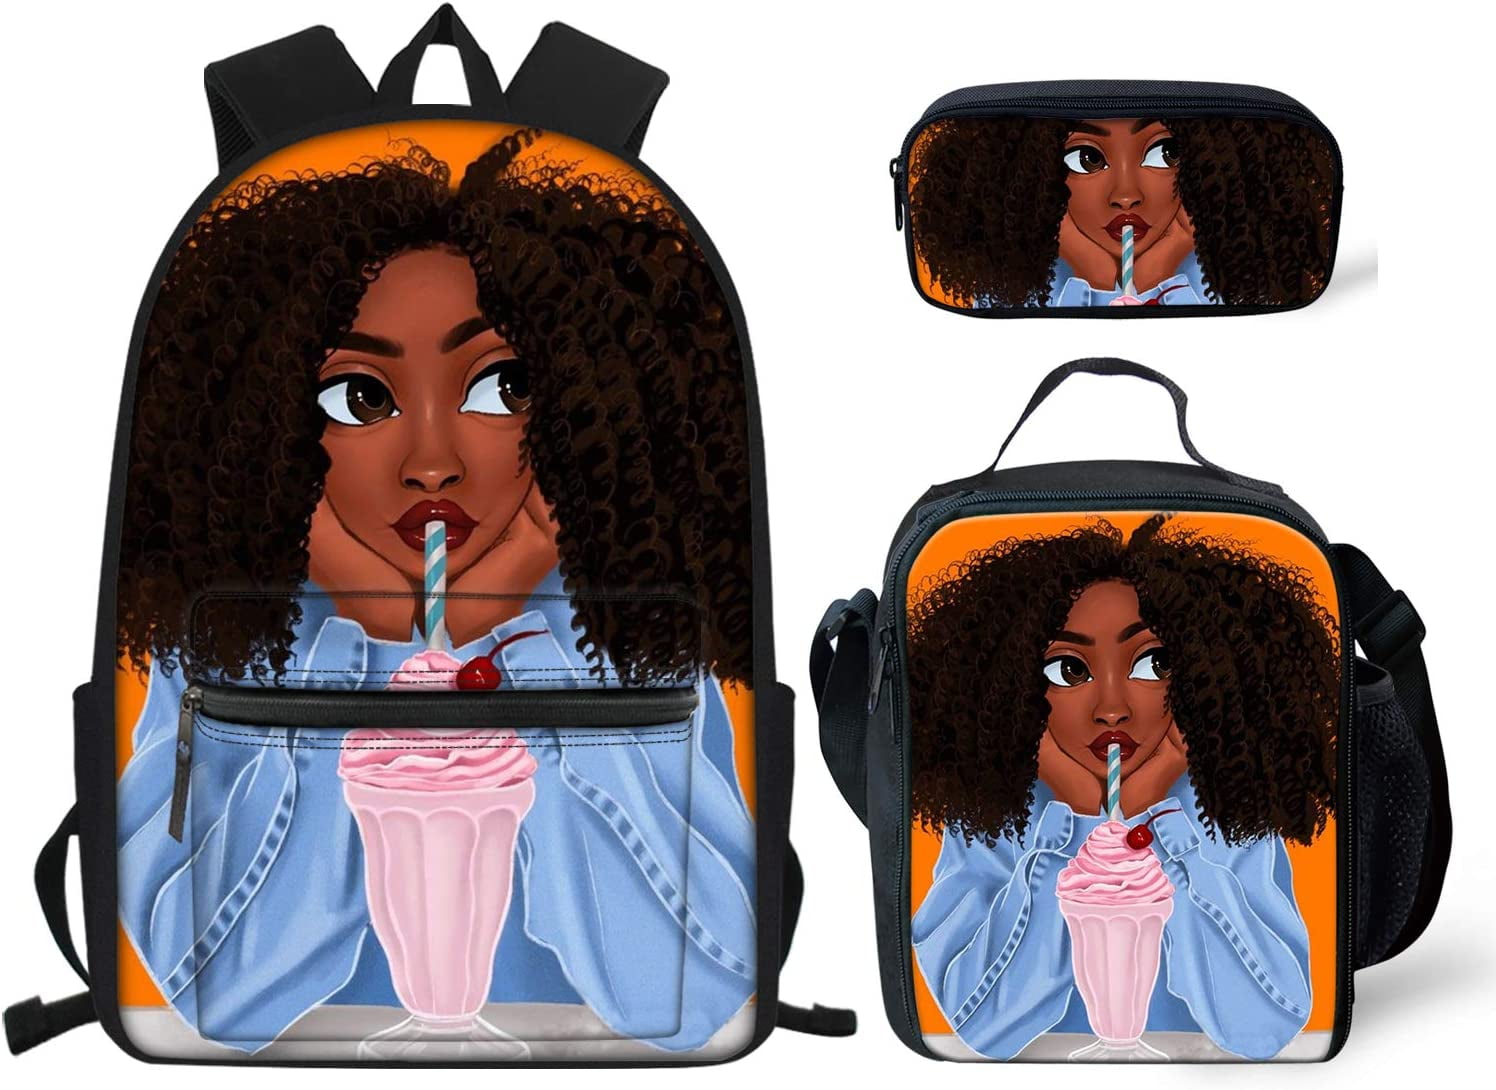 OLOEY 12-INCH African Art Afro Girl Backpacks School Bags Boys Girls Teenage  Students Cosplay Anime bag Student Back-to-School Supplies school bags with  for toddler boys ages 1-2 